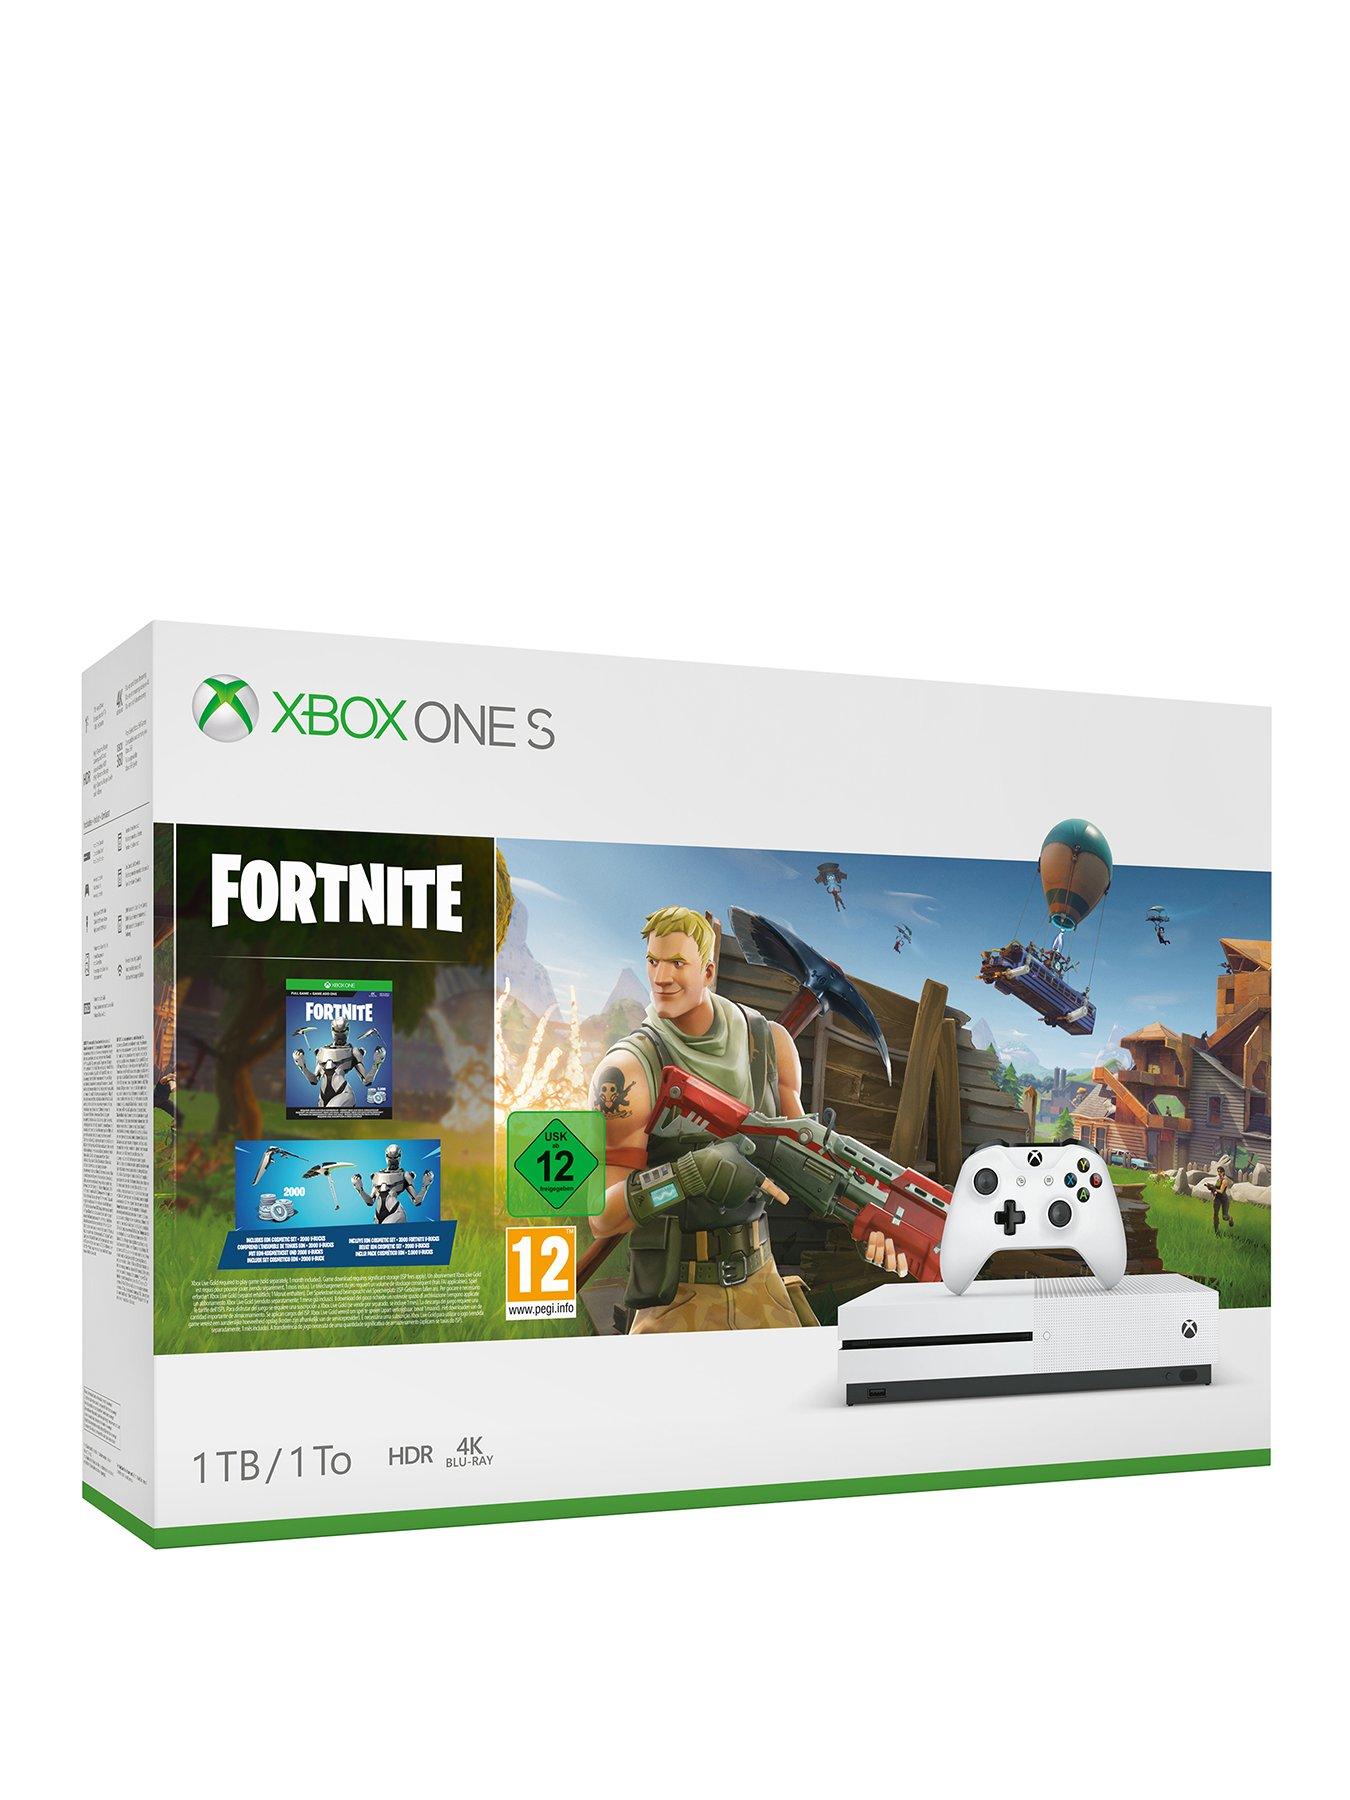 xbox one s fornite 1tb console bundle plus optional extras - fortnite trainers